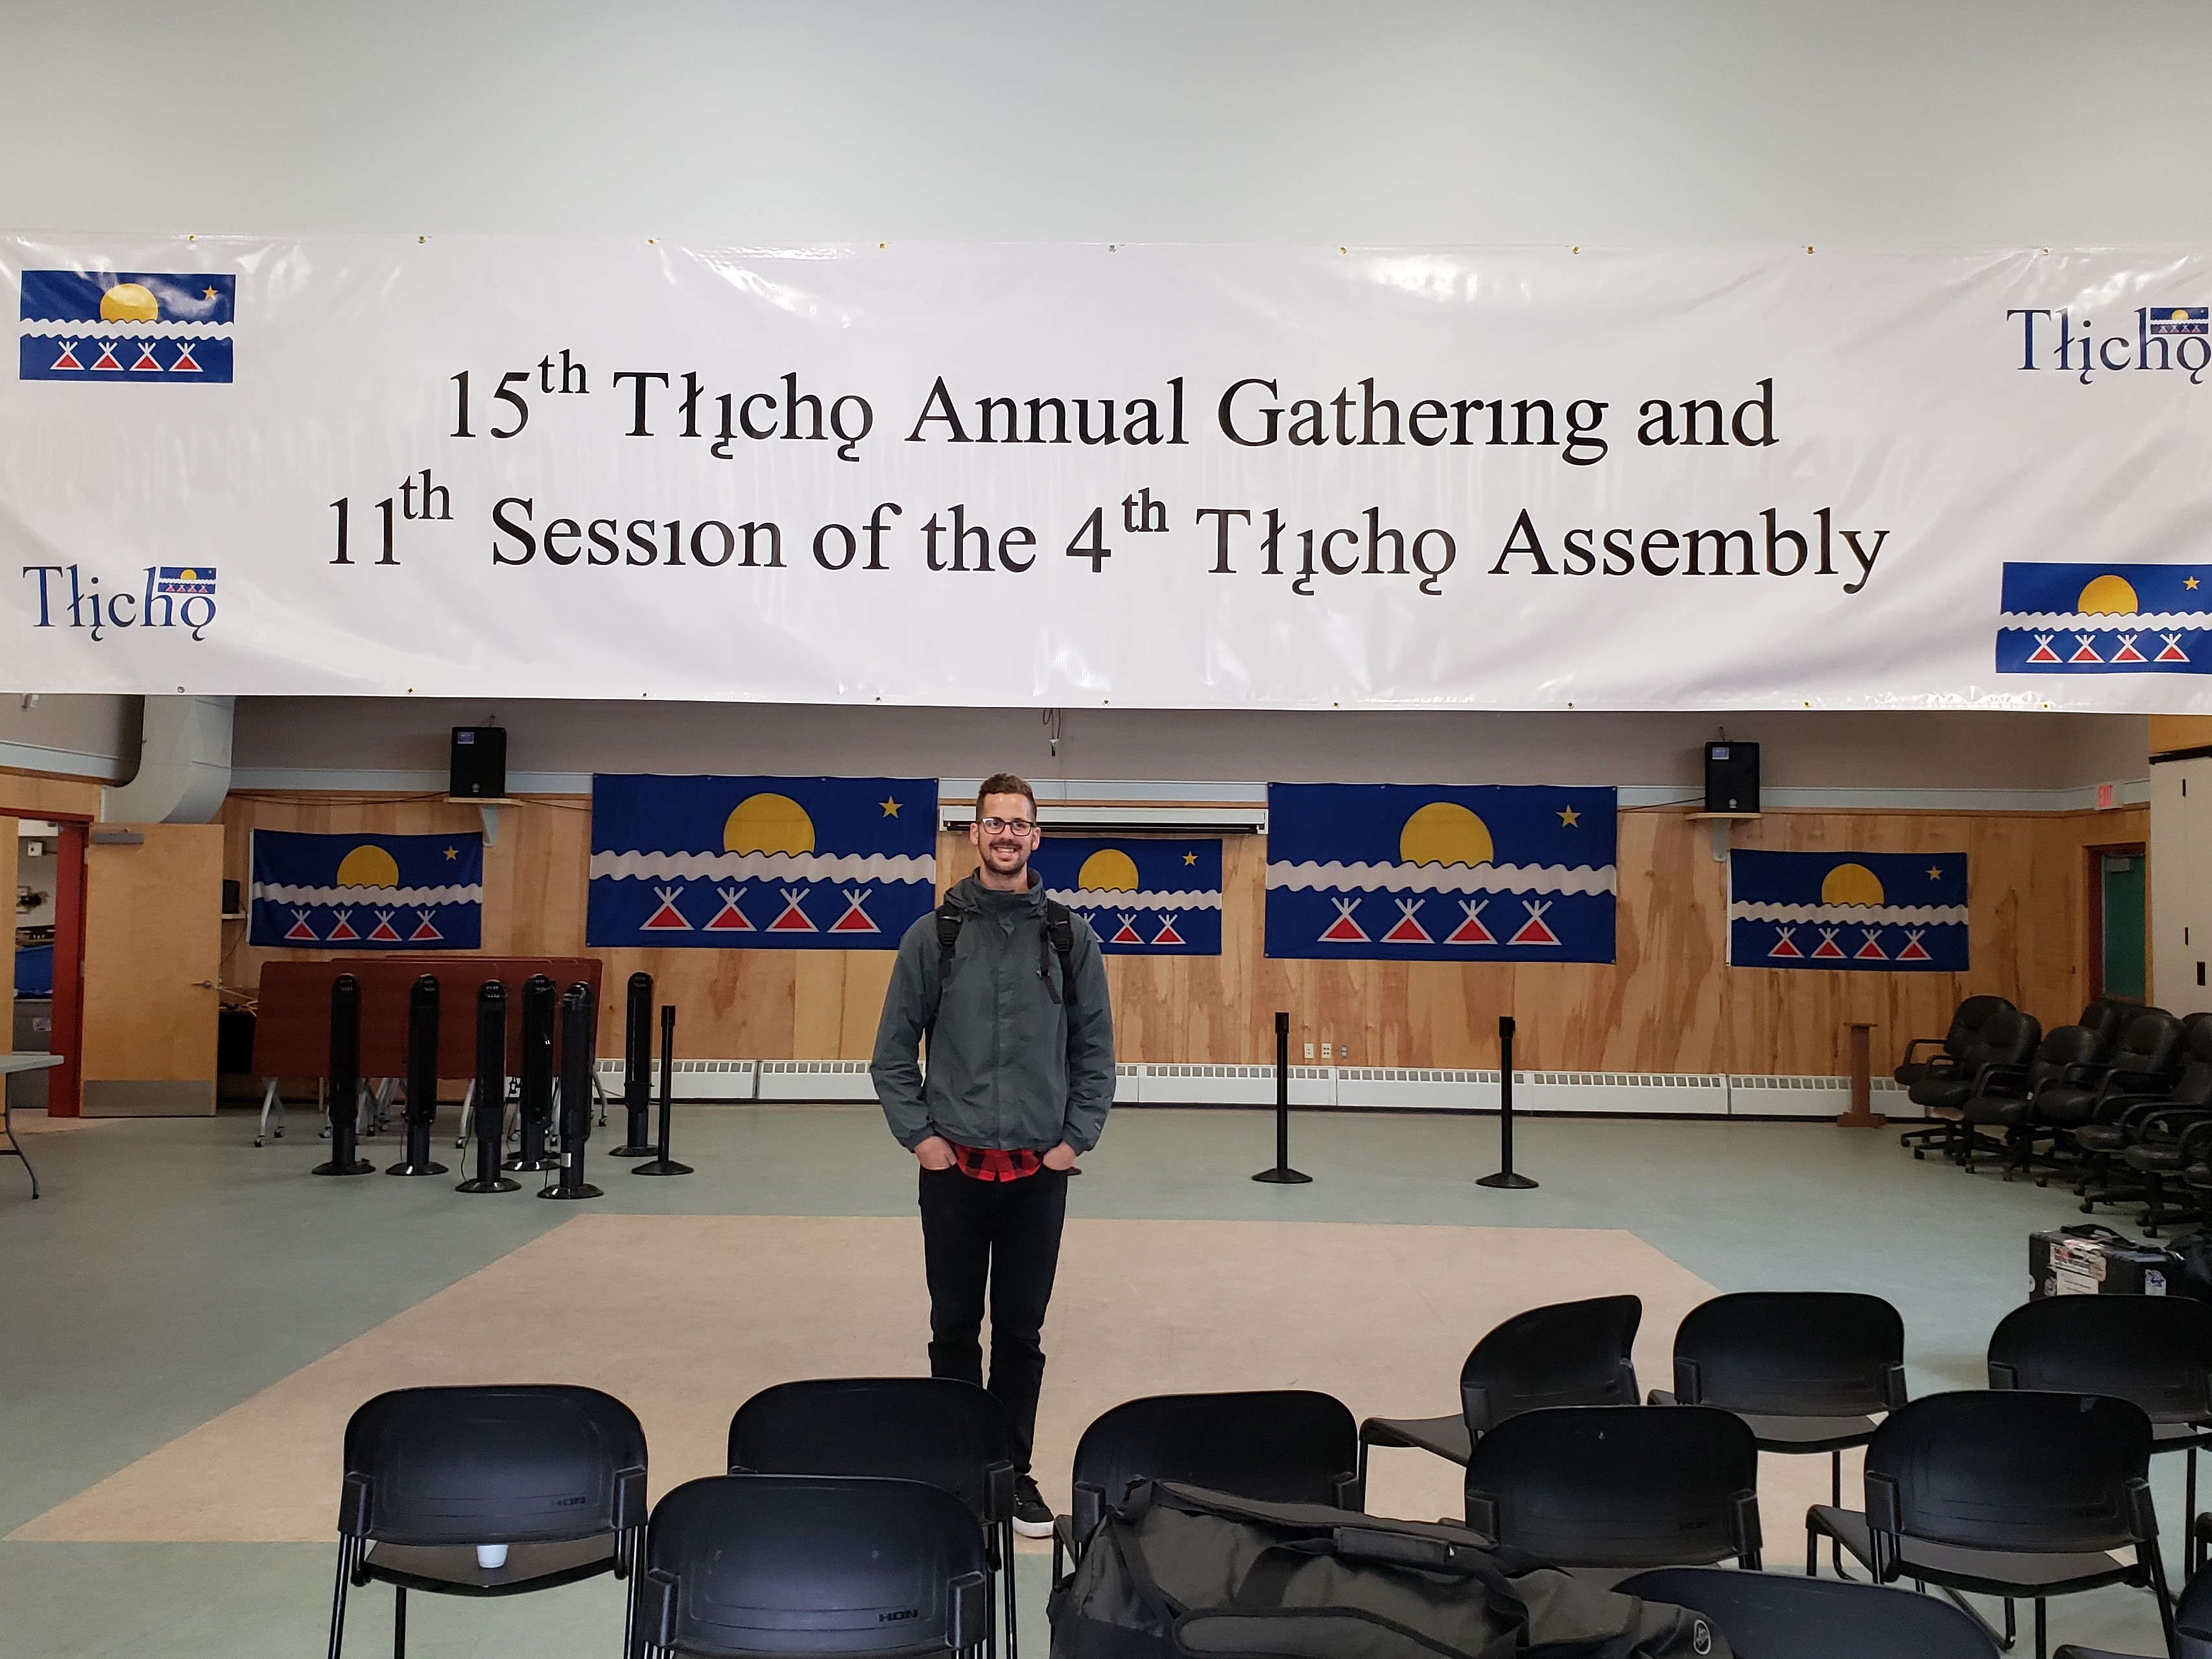 Jason Carrie with the Gathering and Assembly banner